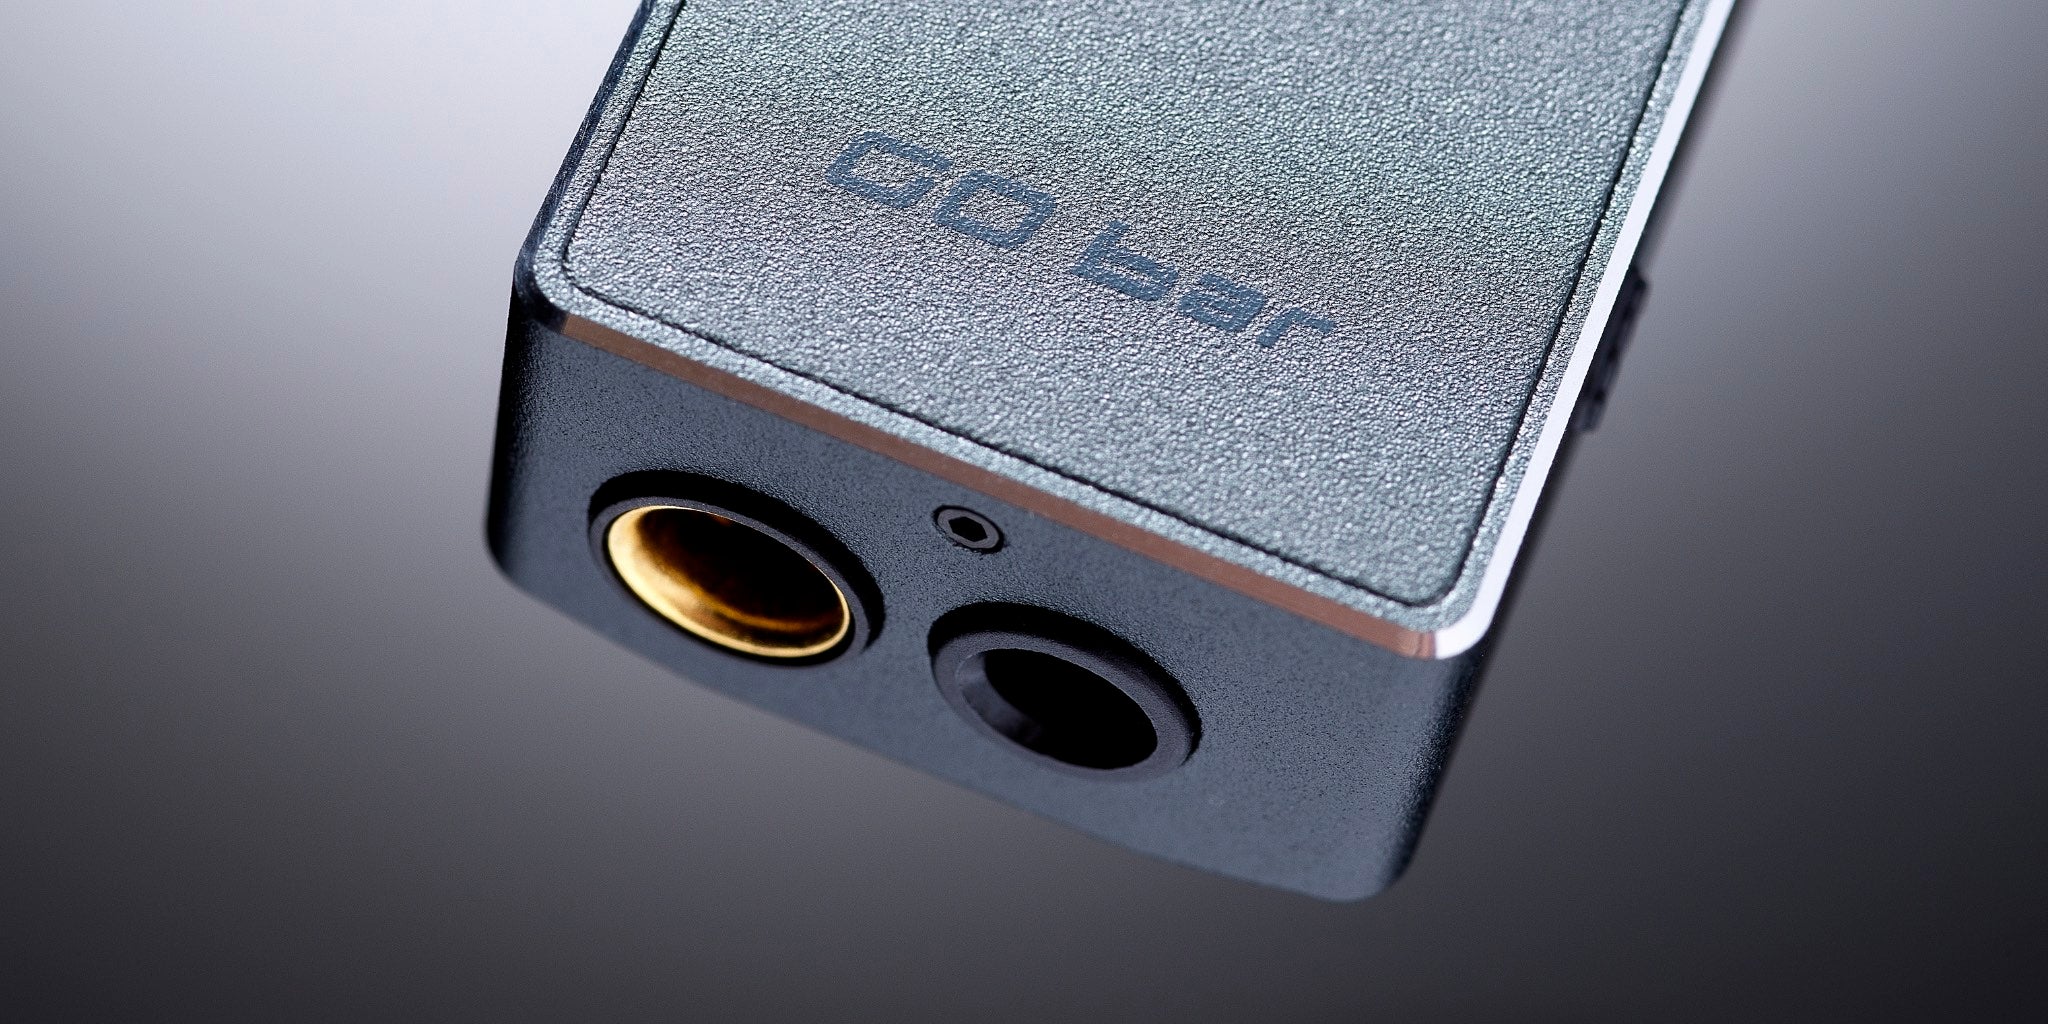 GO bar by iFi audio - The GO bar ultraportable DAC/headphone amp is the  world's most powerful for its size.